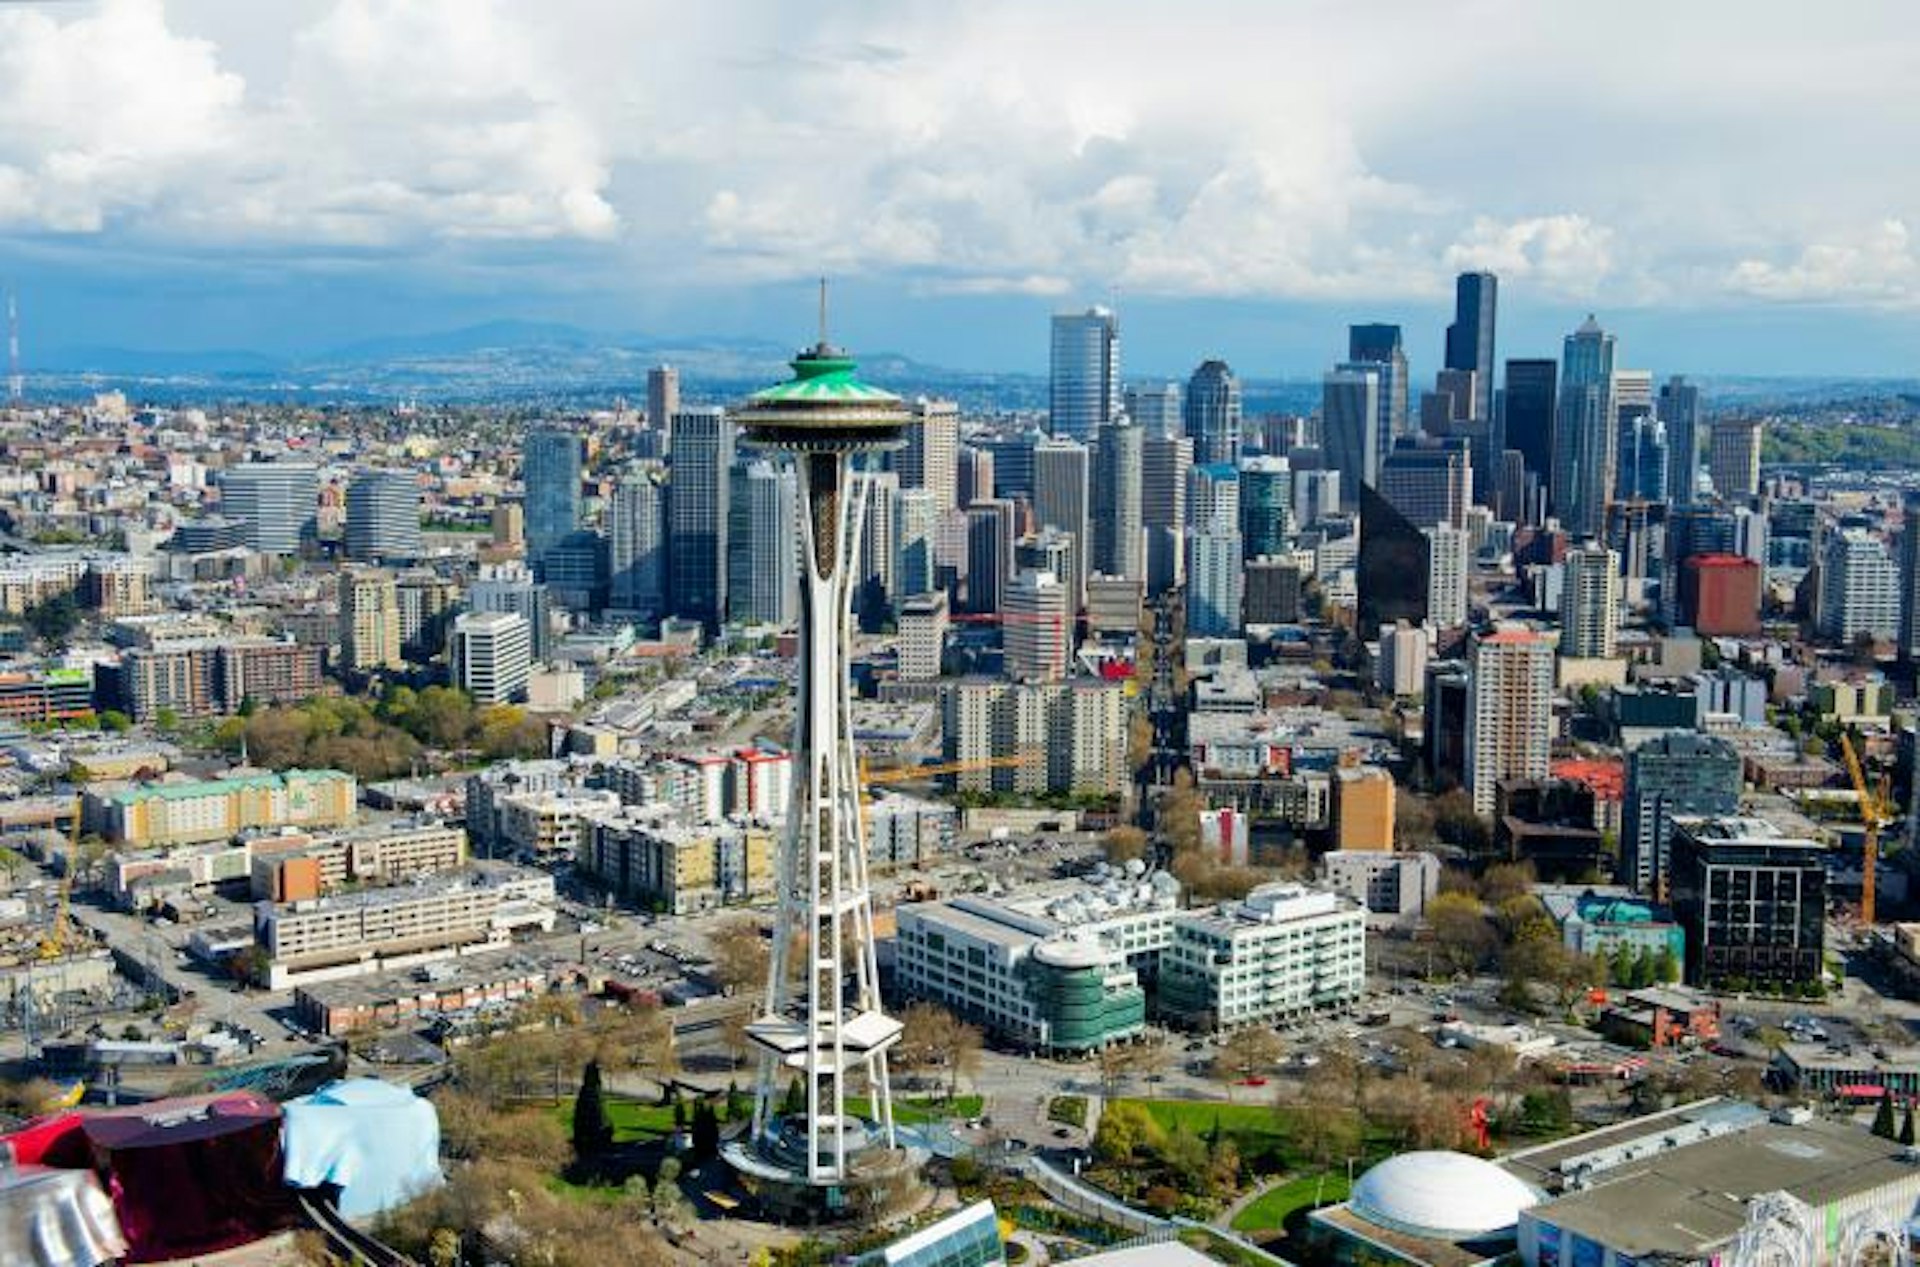 Aerial view over Seattle's urban jungle. Image by Peter Saloutos / Image Source / Getty Images.